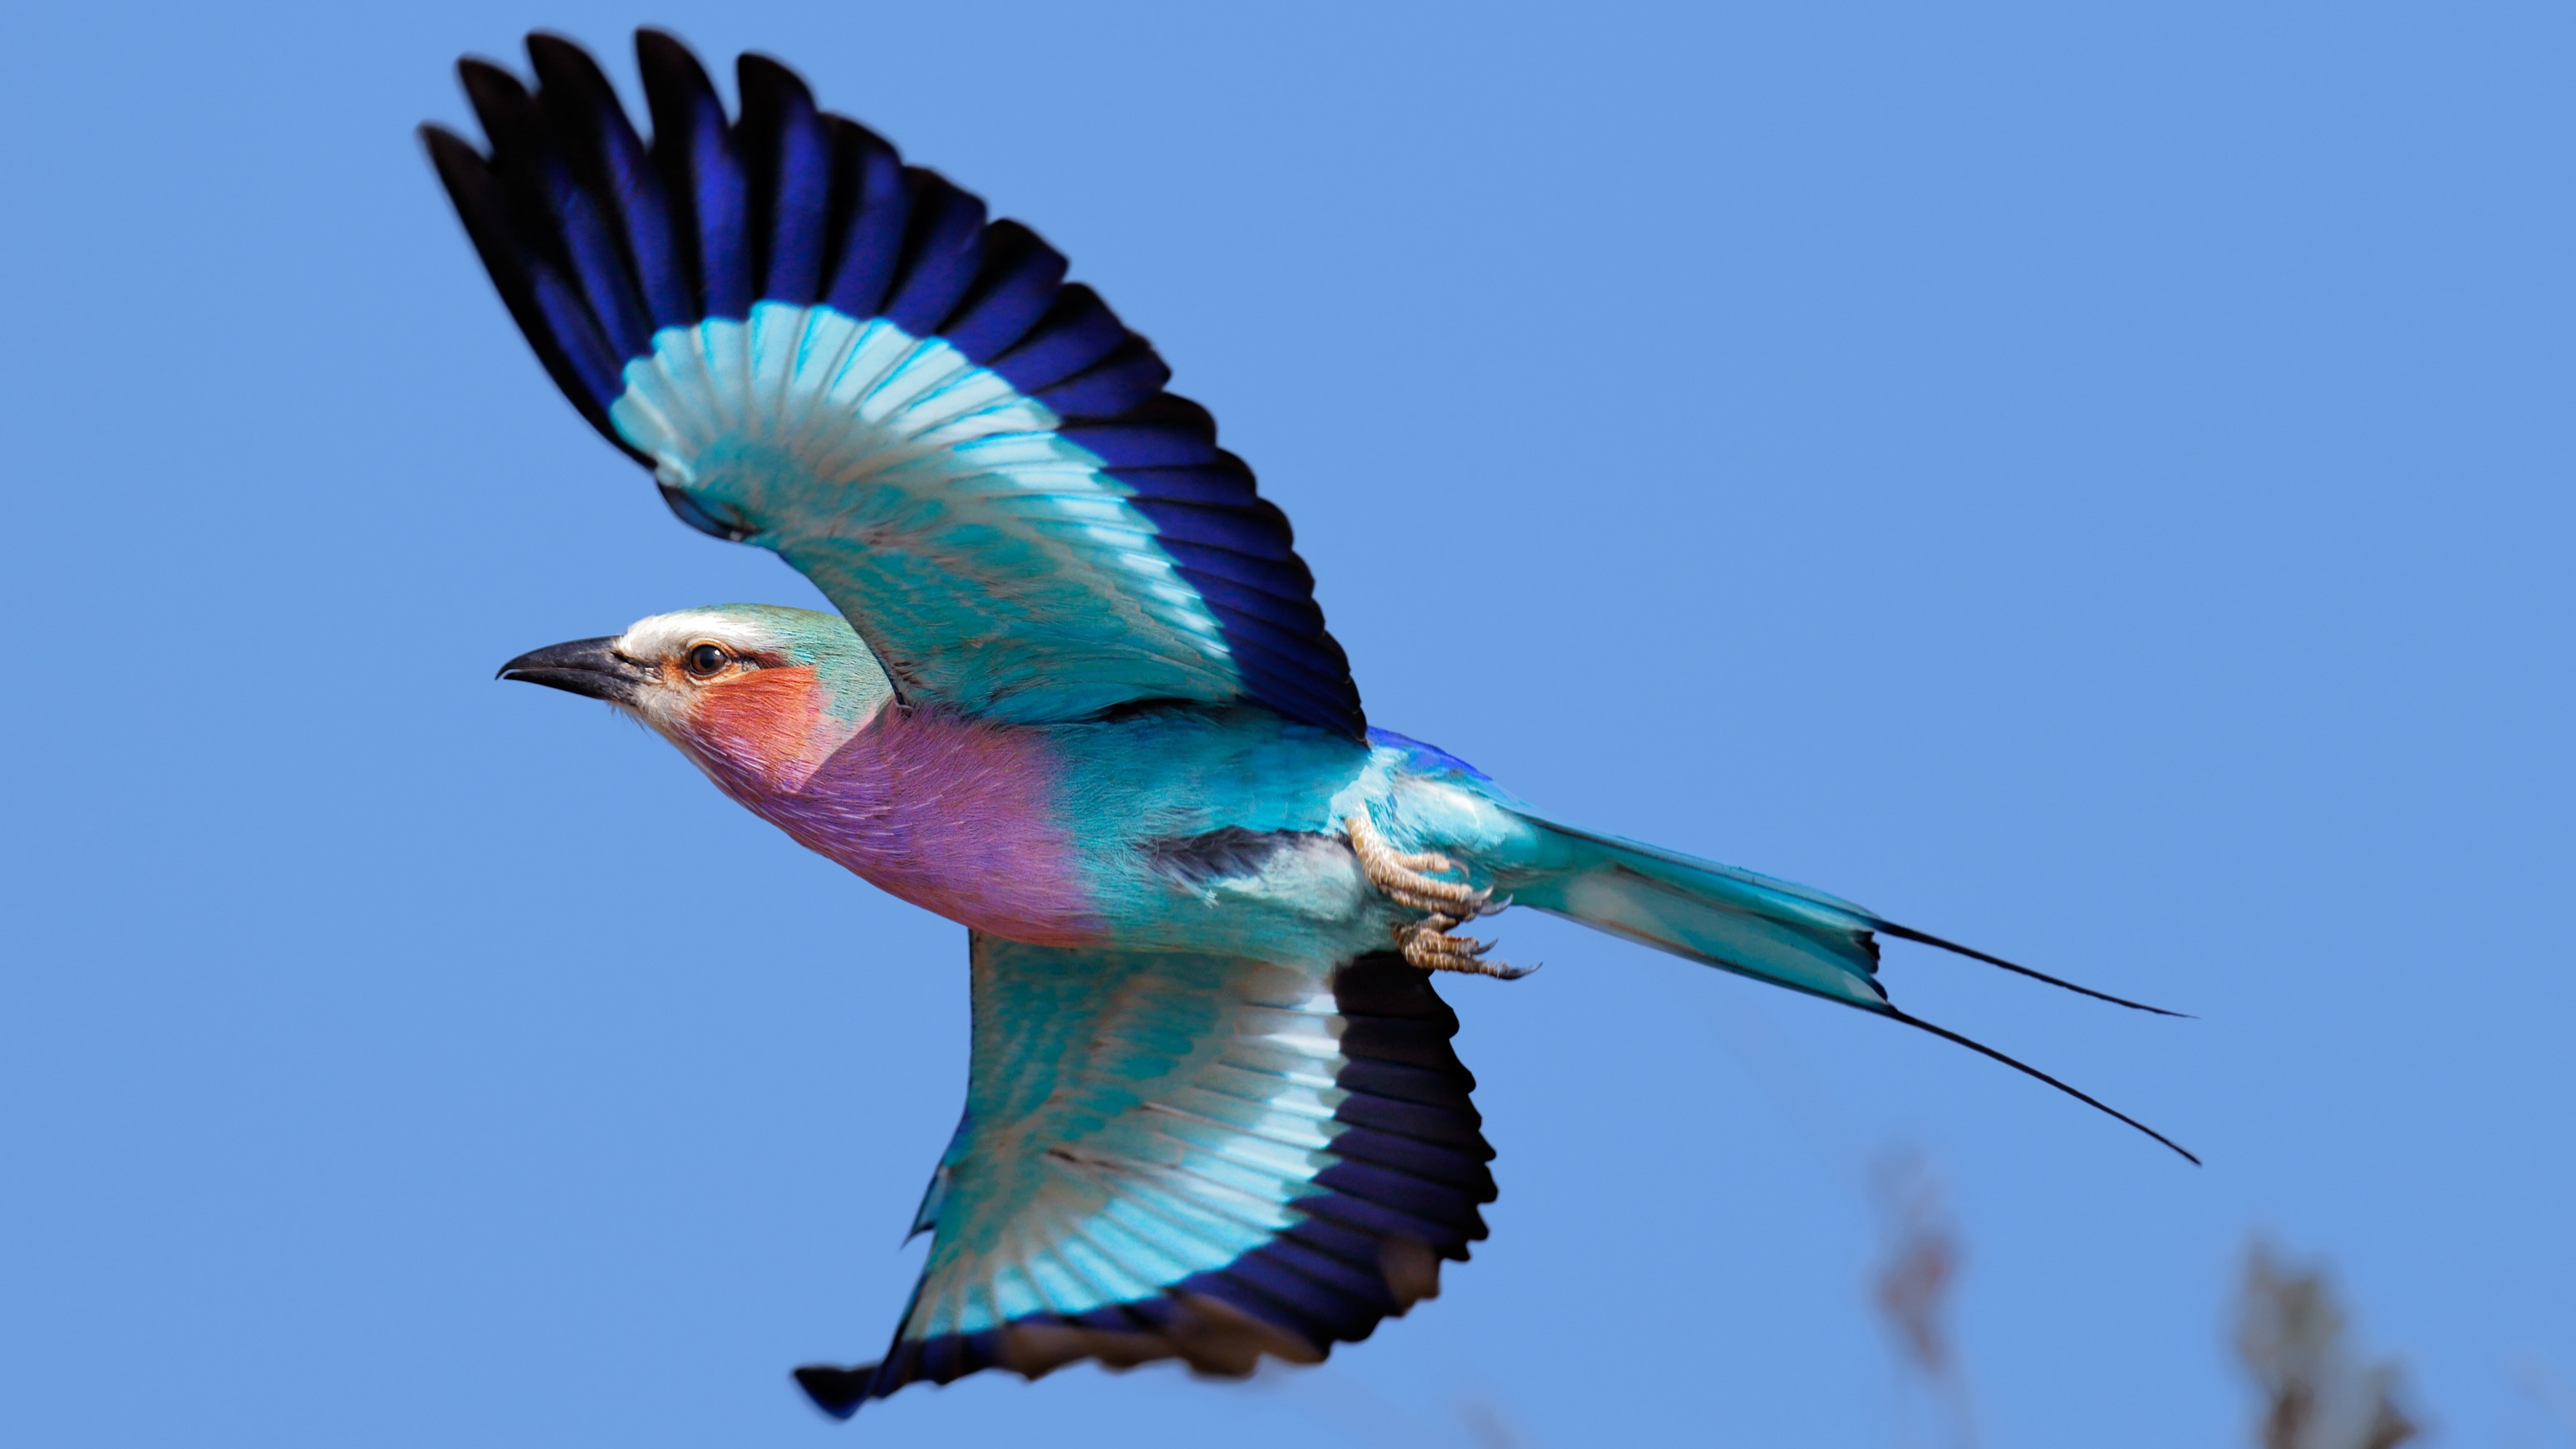 A lilac-breasted roller seen flying from beneath.